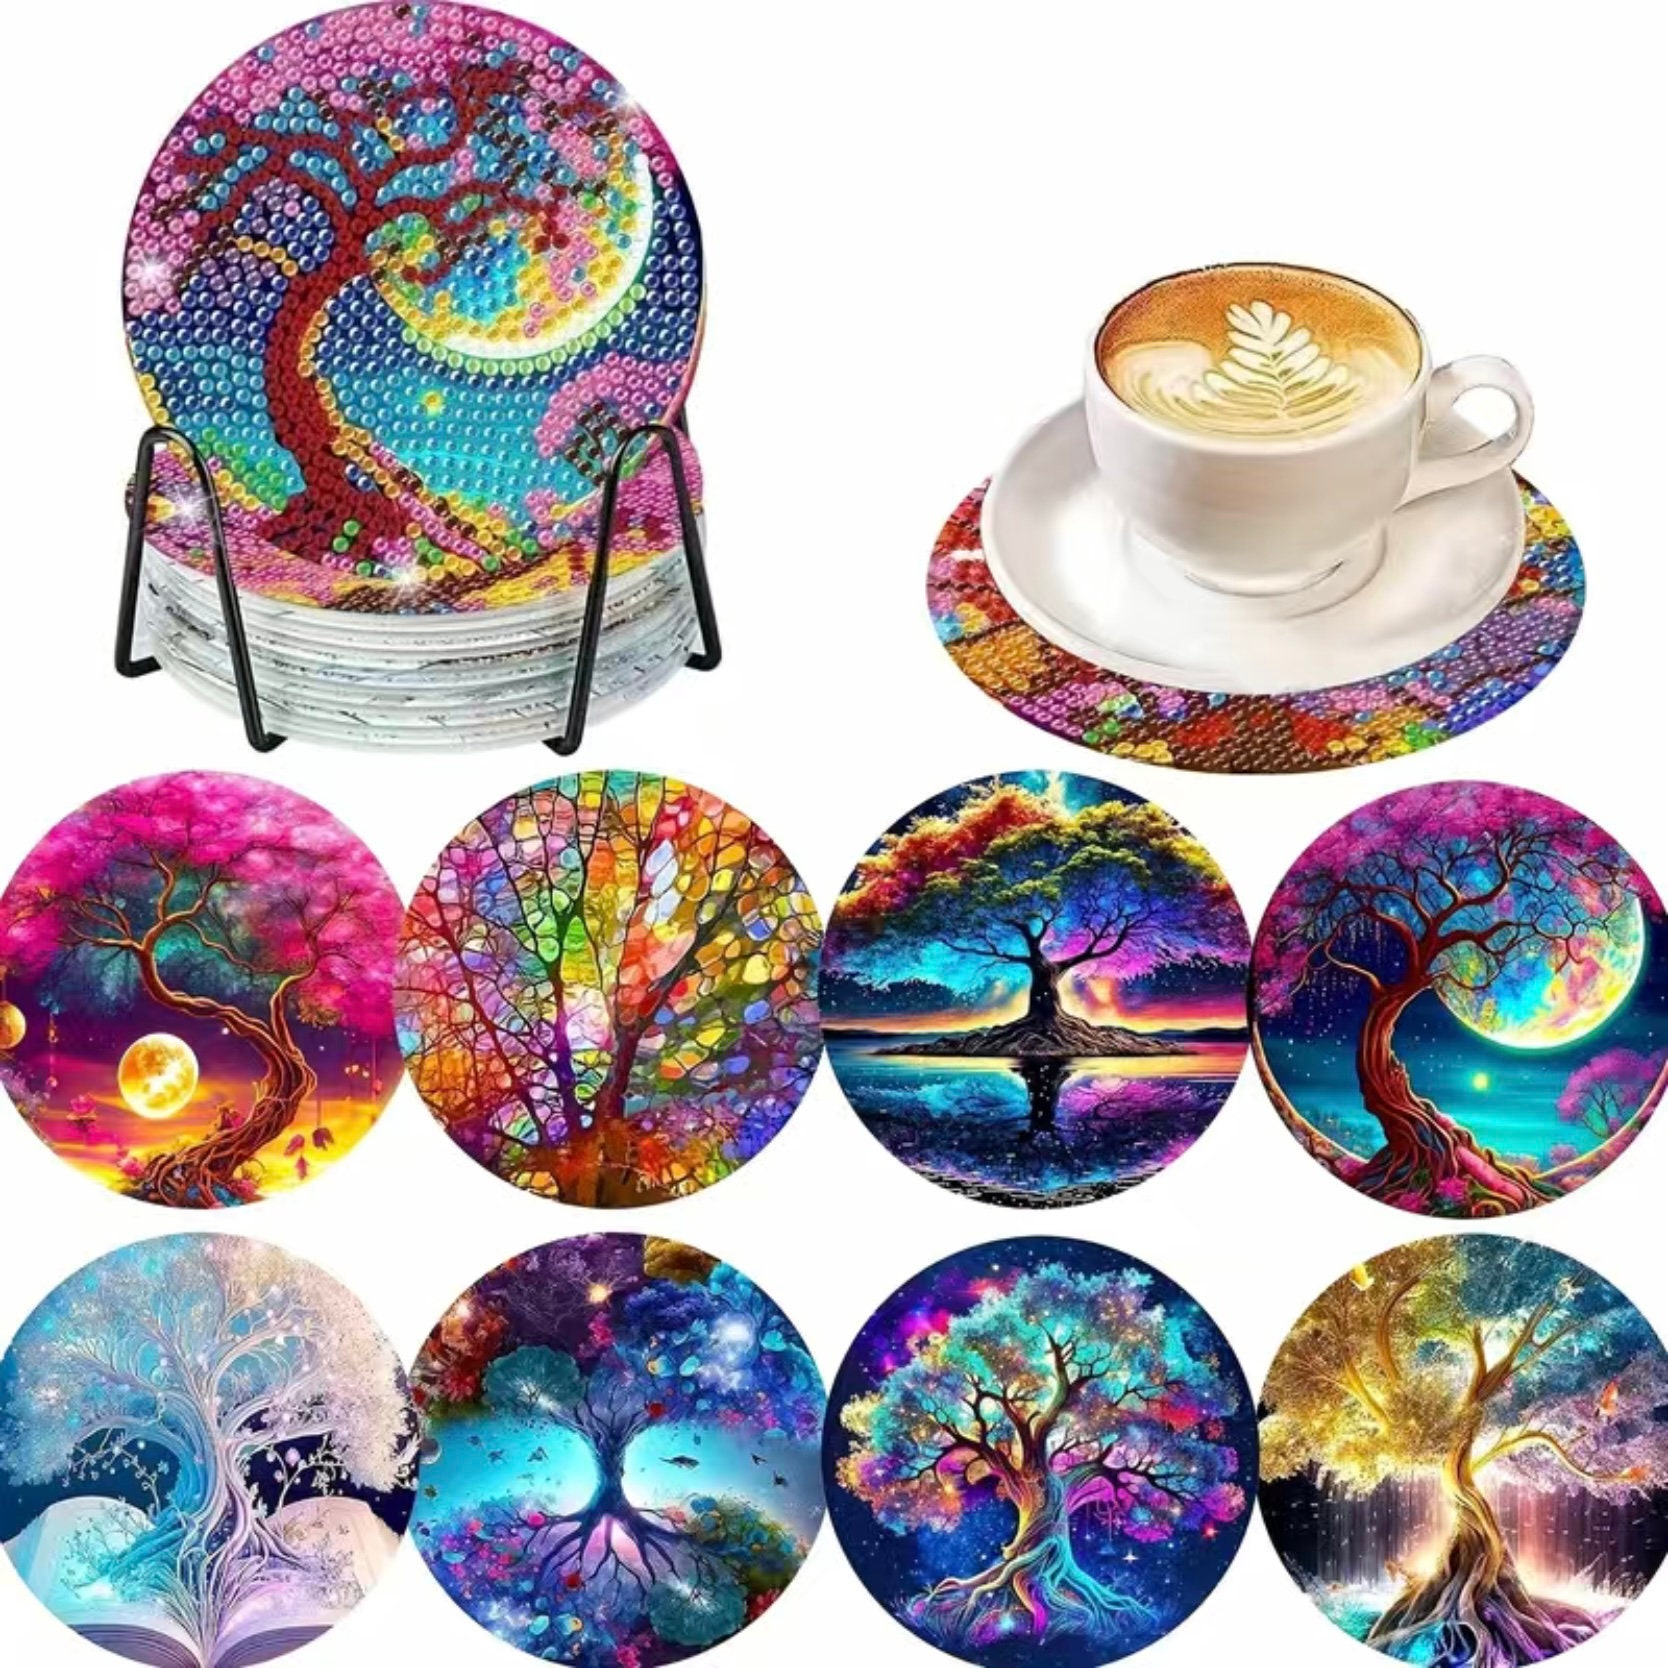 8pcs Artificial Diamond Painting Coasters Kit With Holder - Colorful Tree  Artificial Diamond Dot Art Coasters For Adults Beginners, DIY Art And Crafts